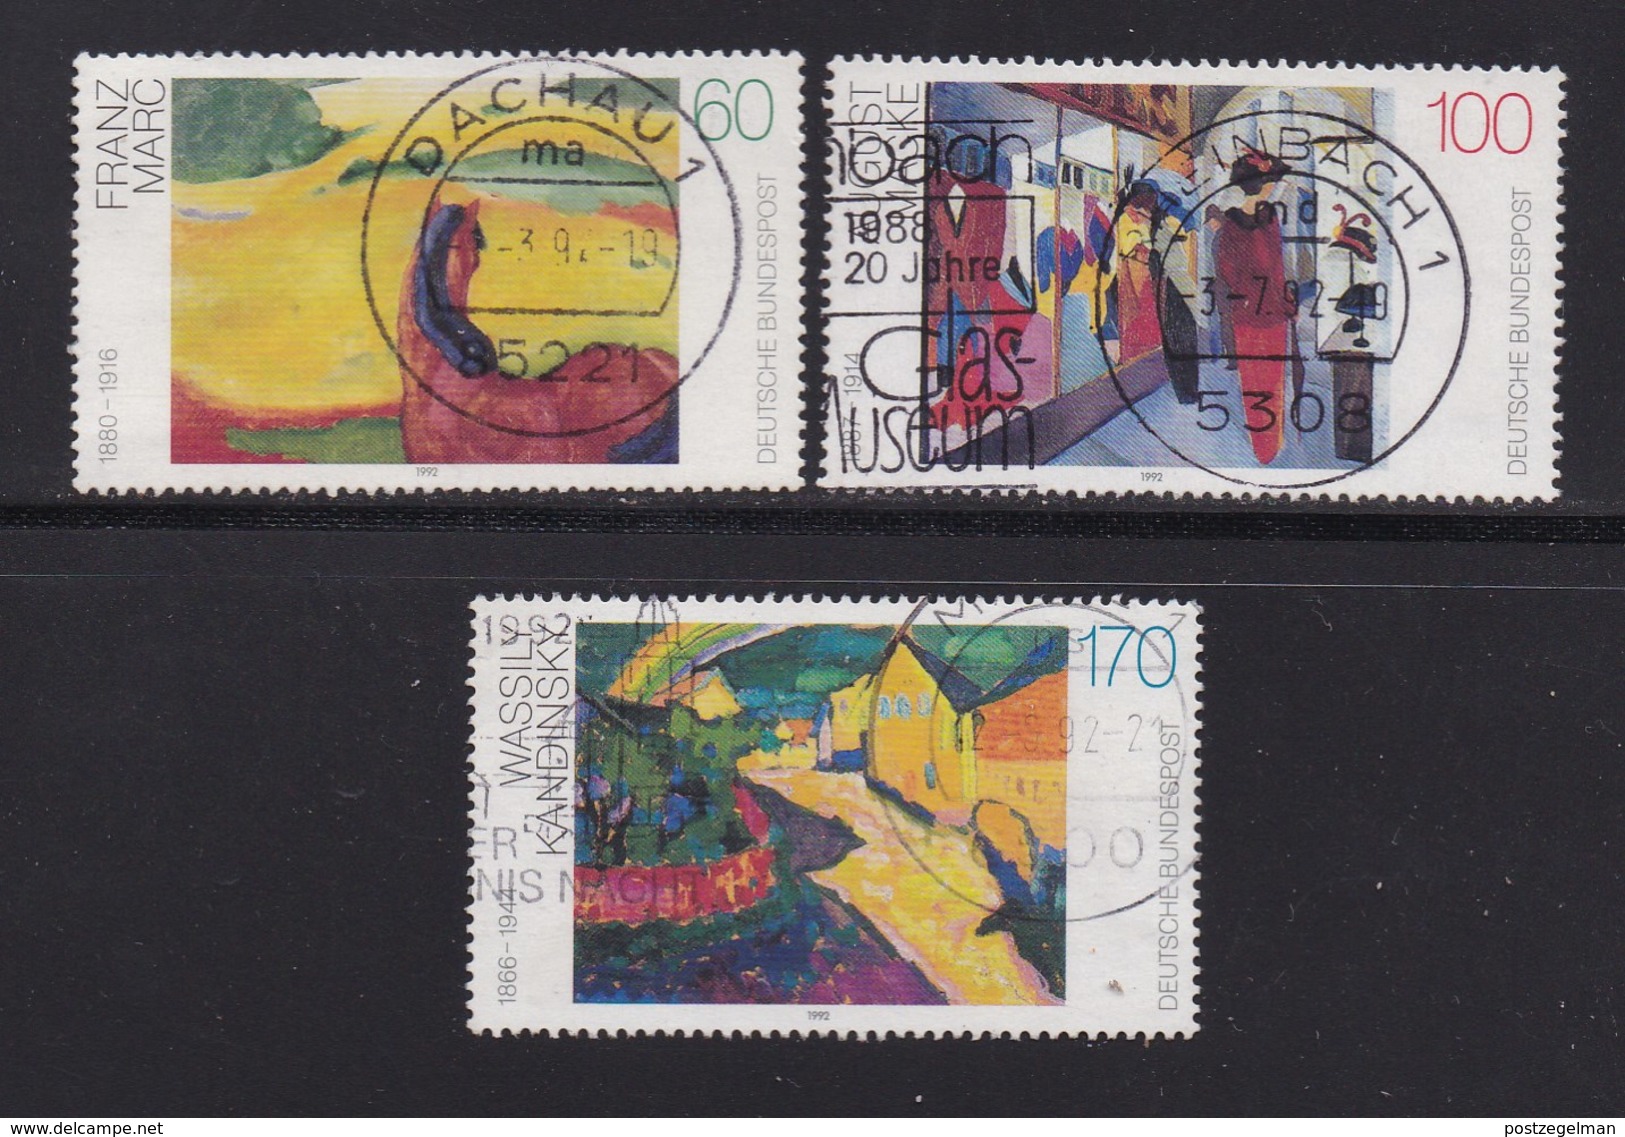 GERMANY 1992 Used Stamp(s) Paintings Nrs. 1617-1619 - Used Stamps